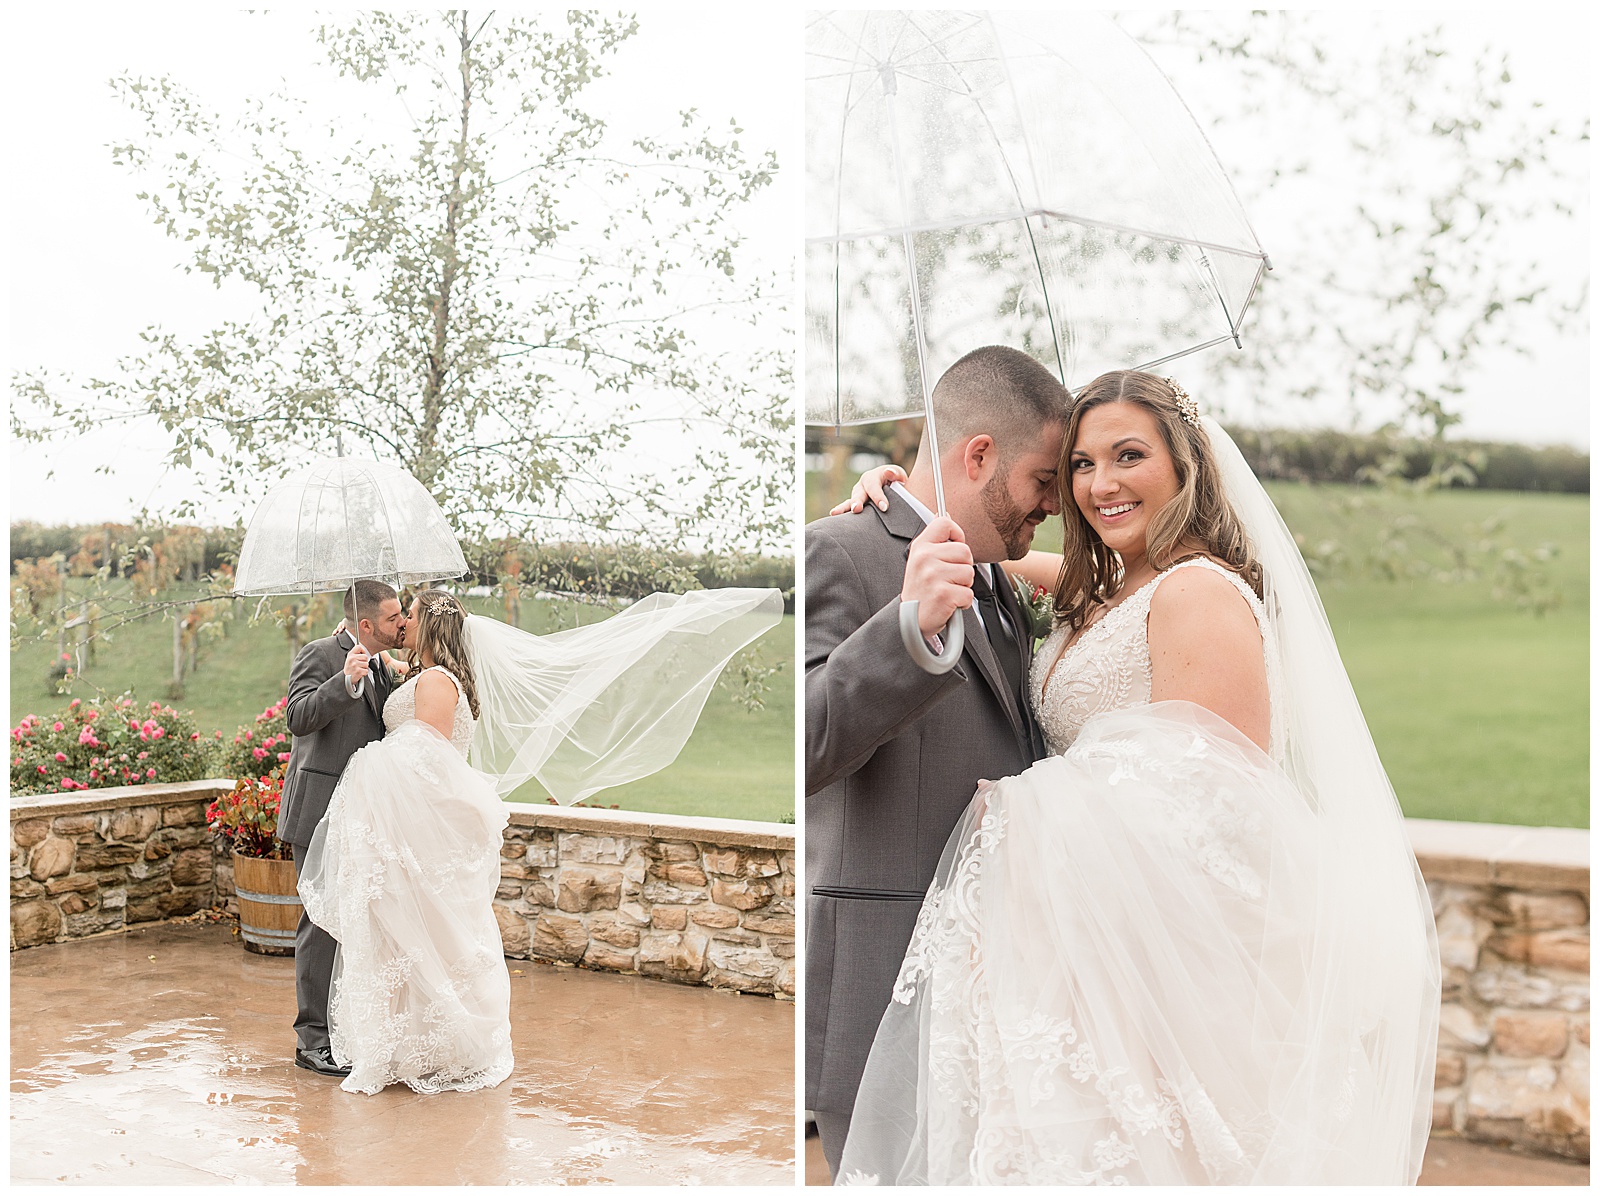 groom holding clear umbrella over himself and his bride on patio on rainy wedding day as they kiss